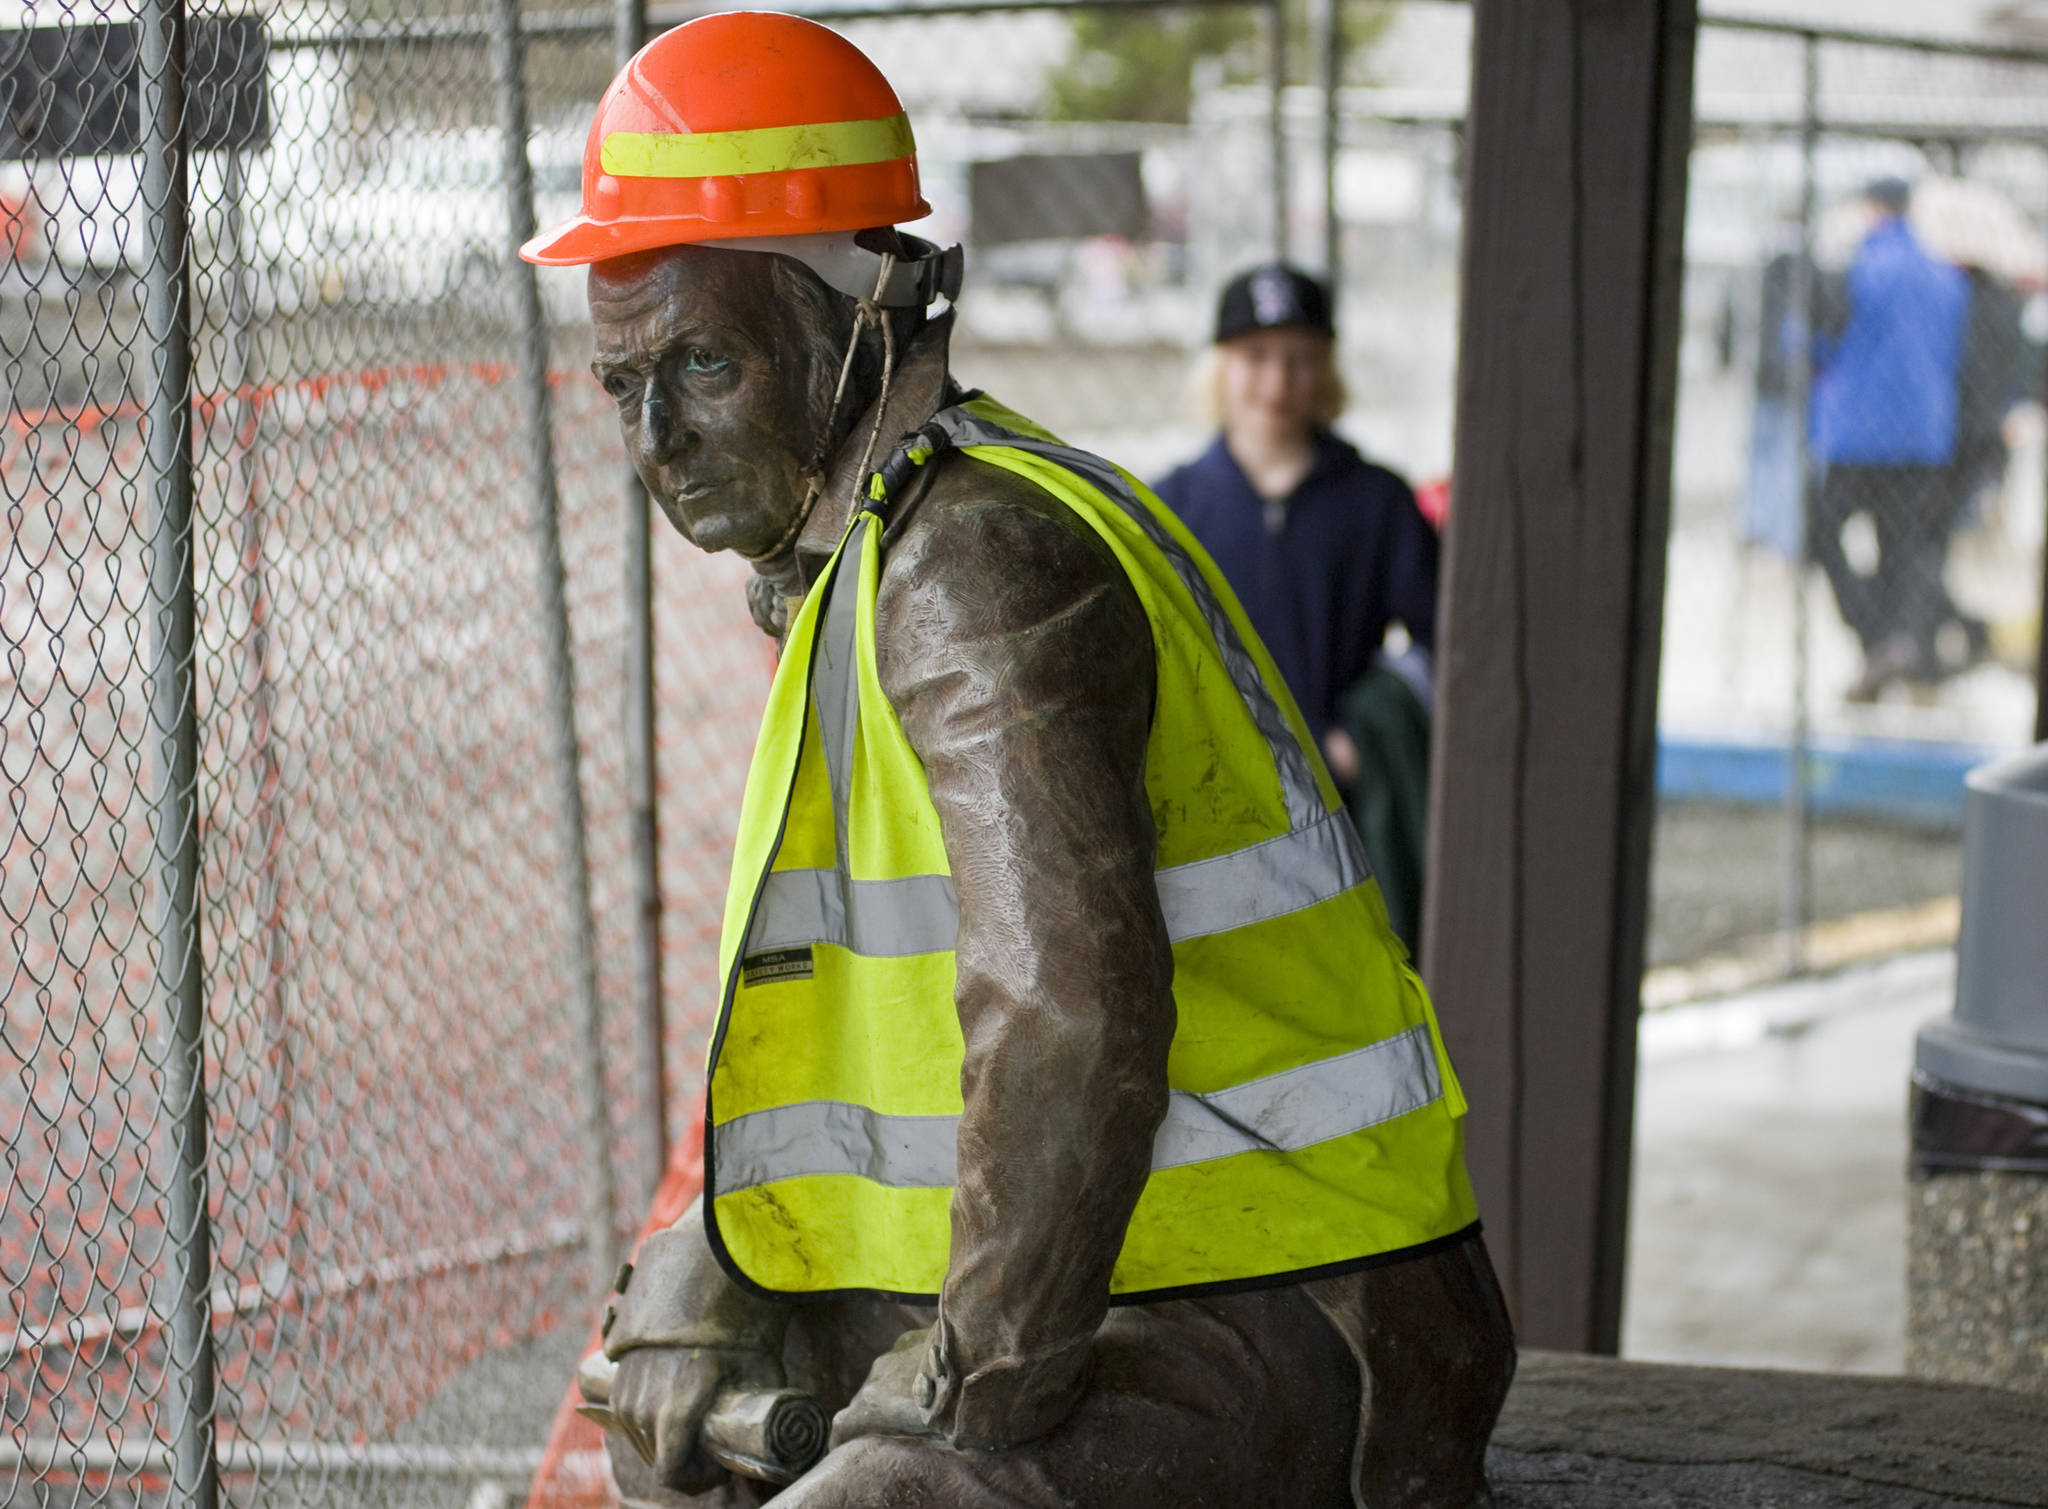 The bronze statue of 19th century Russian America Governor Alexander Baranov sports a hard hat and a reflective vest, after being moved from its original site in front of Centennial Hall in Sitka in February 2013. Far away from Confederate memorials, Alaska residents have joined the movement to eliminate statues of colonialists accused of abusing and exploiting Indigenous people. The effort has already resulted in the statue of Baranov being taken out of public view in the city. (James Poulson/Daily Sitka Sentinel via AP, File)